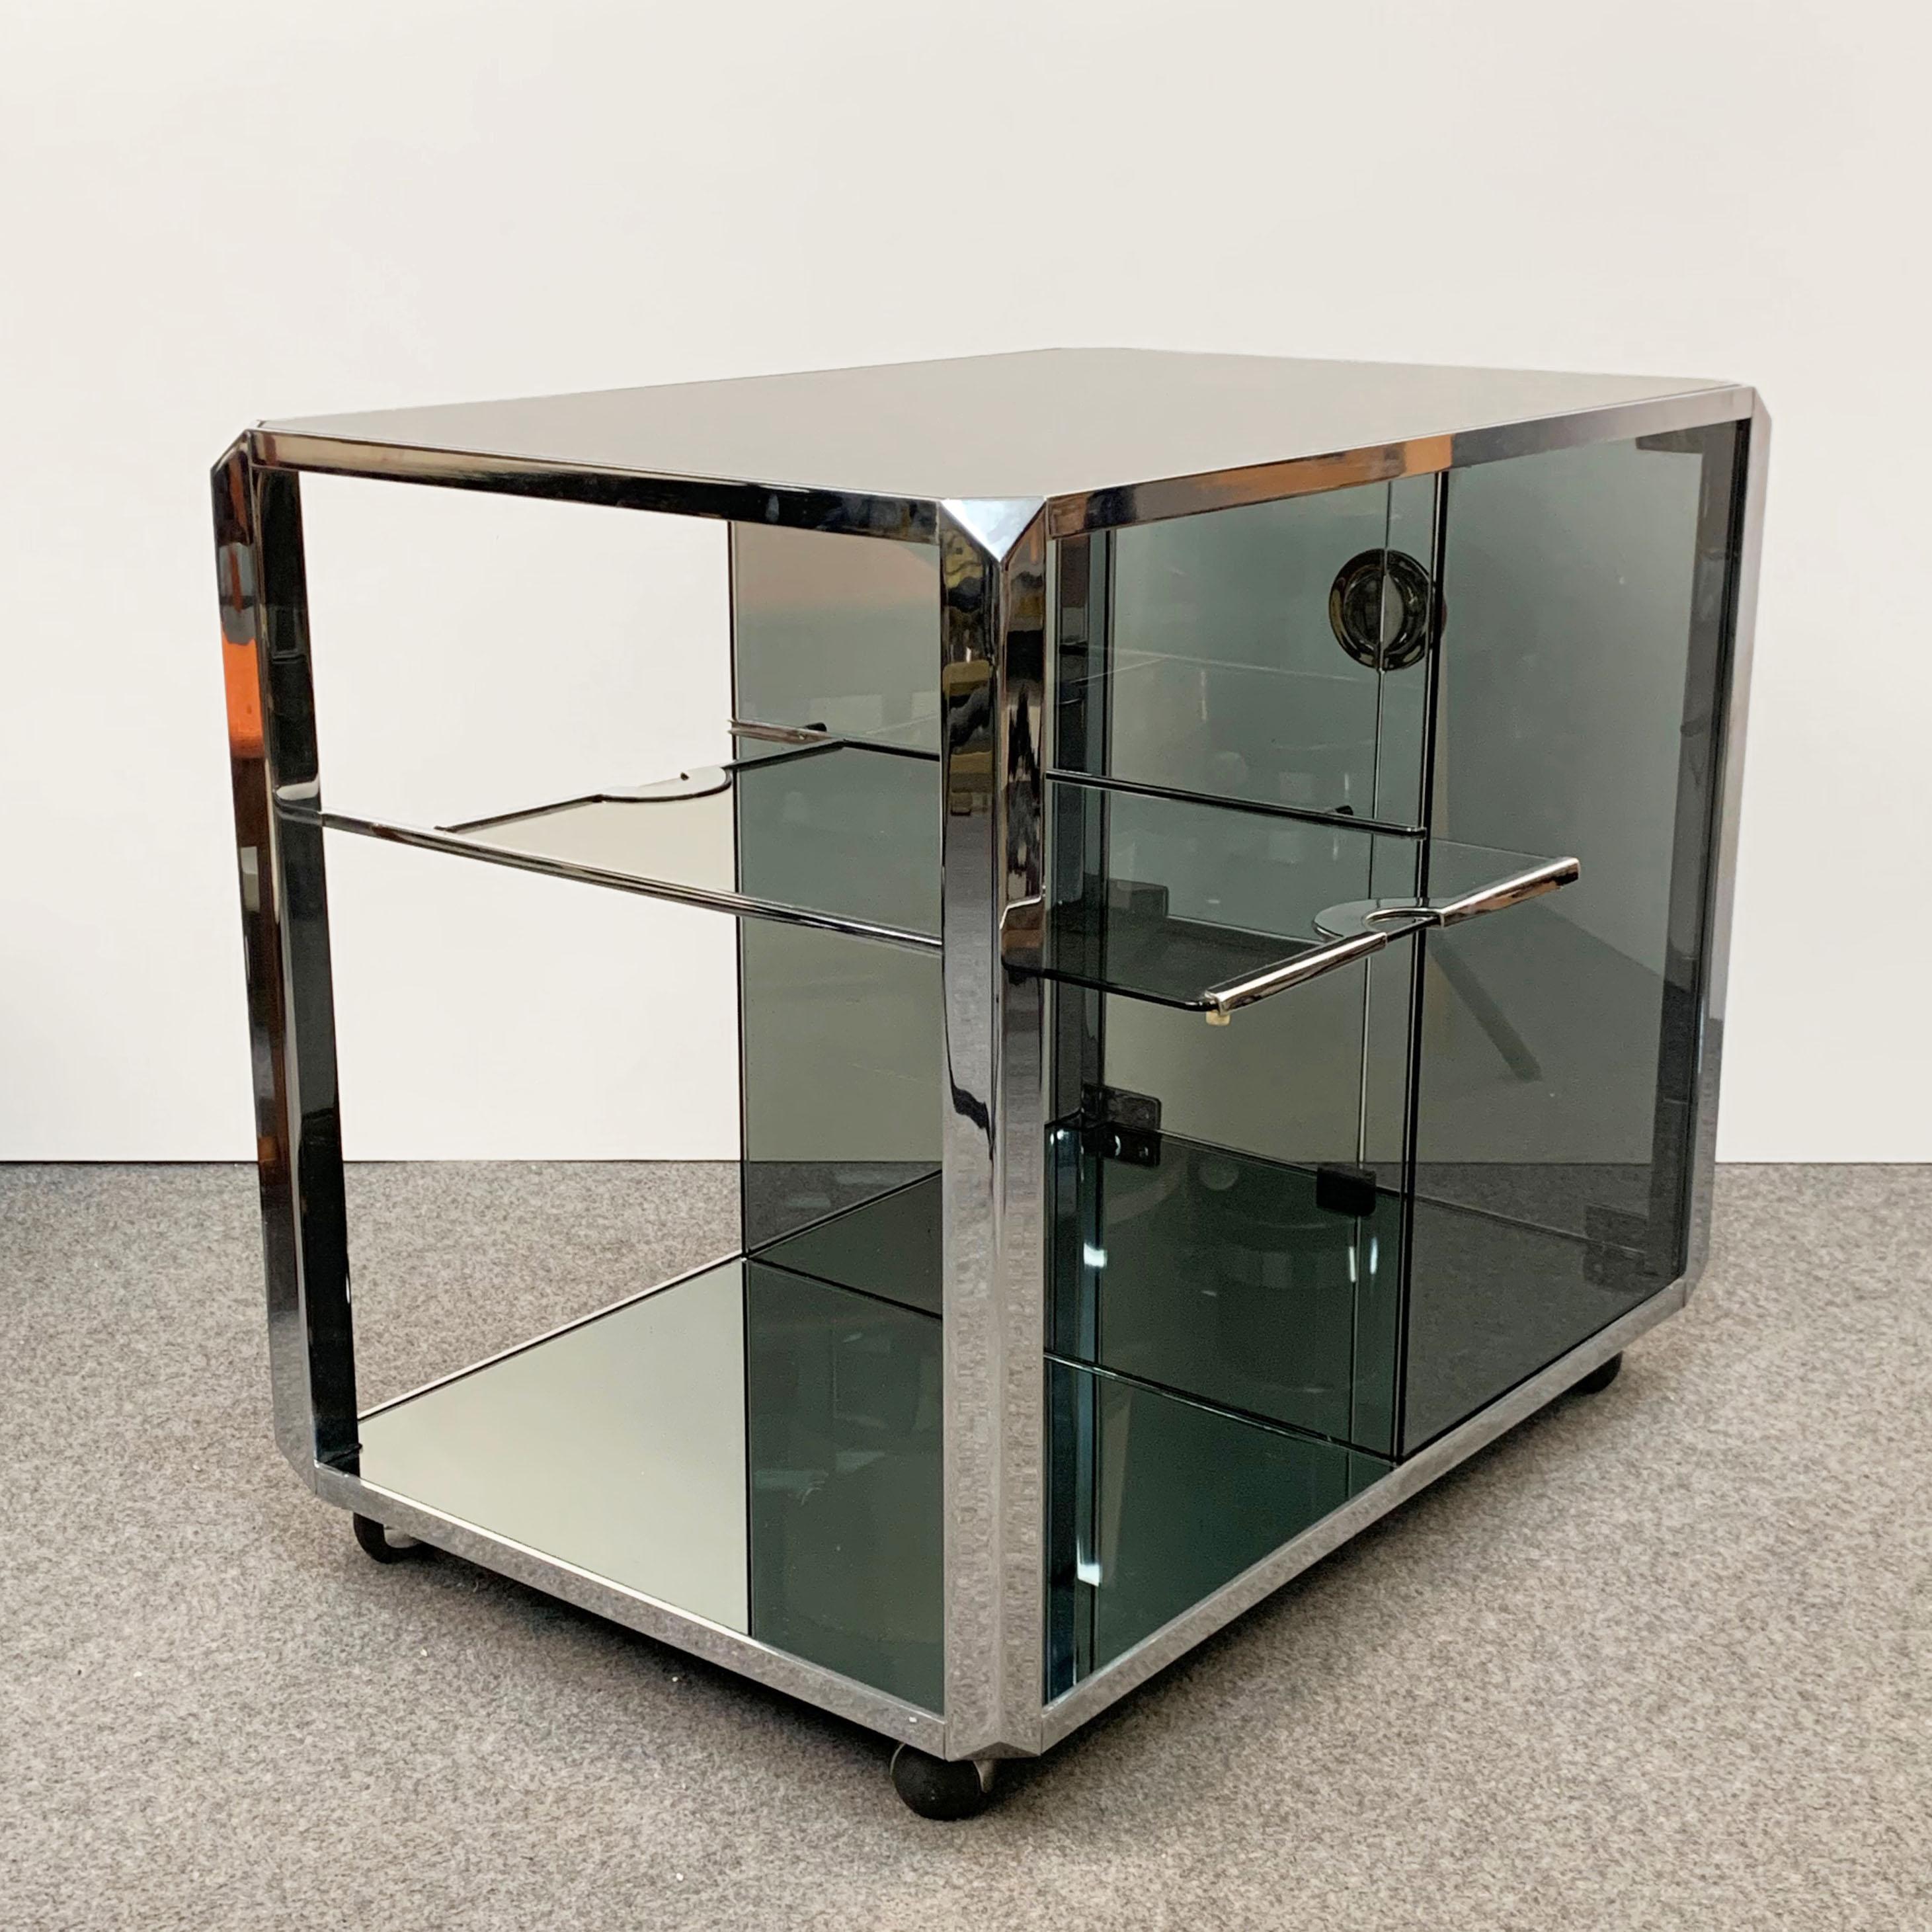 Elegant glass bar trolley with smoked mirrors and heavy chrome finishes. The attention to detail on this cart is second to none as it was designed by Willy Rizzo for Mario Sabot. It is an Italian production from the 1970s.

This masterpiece has